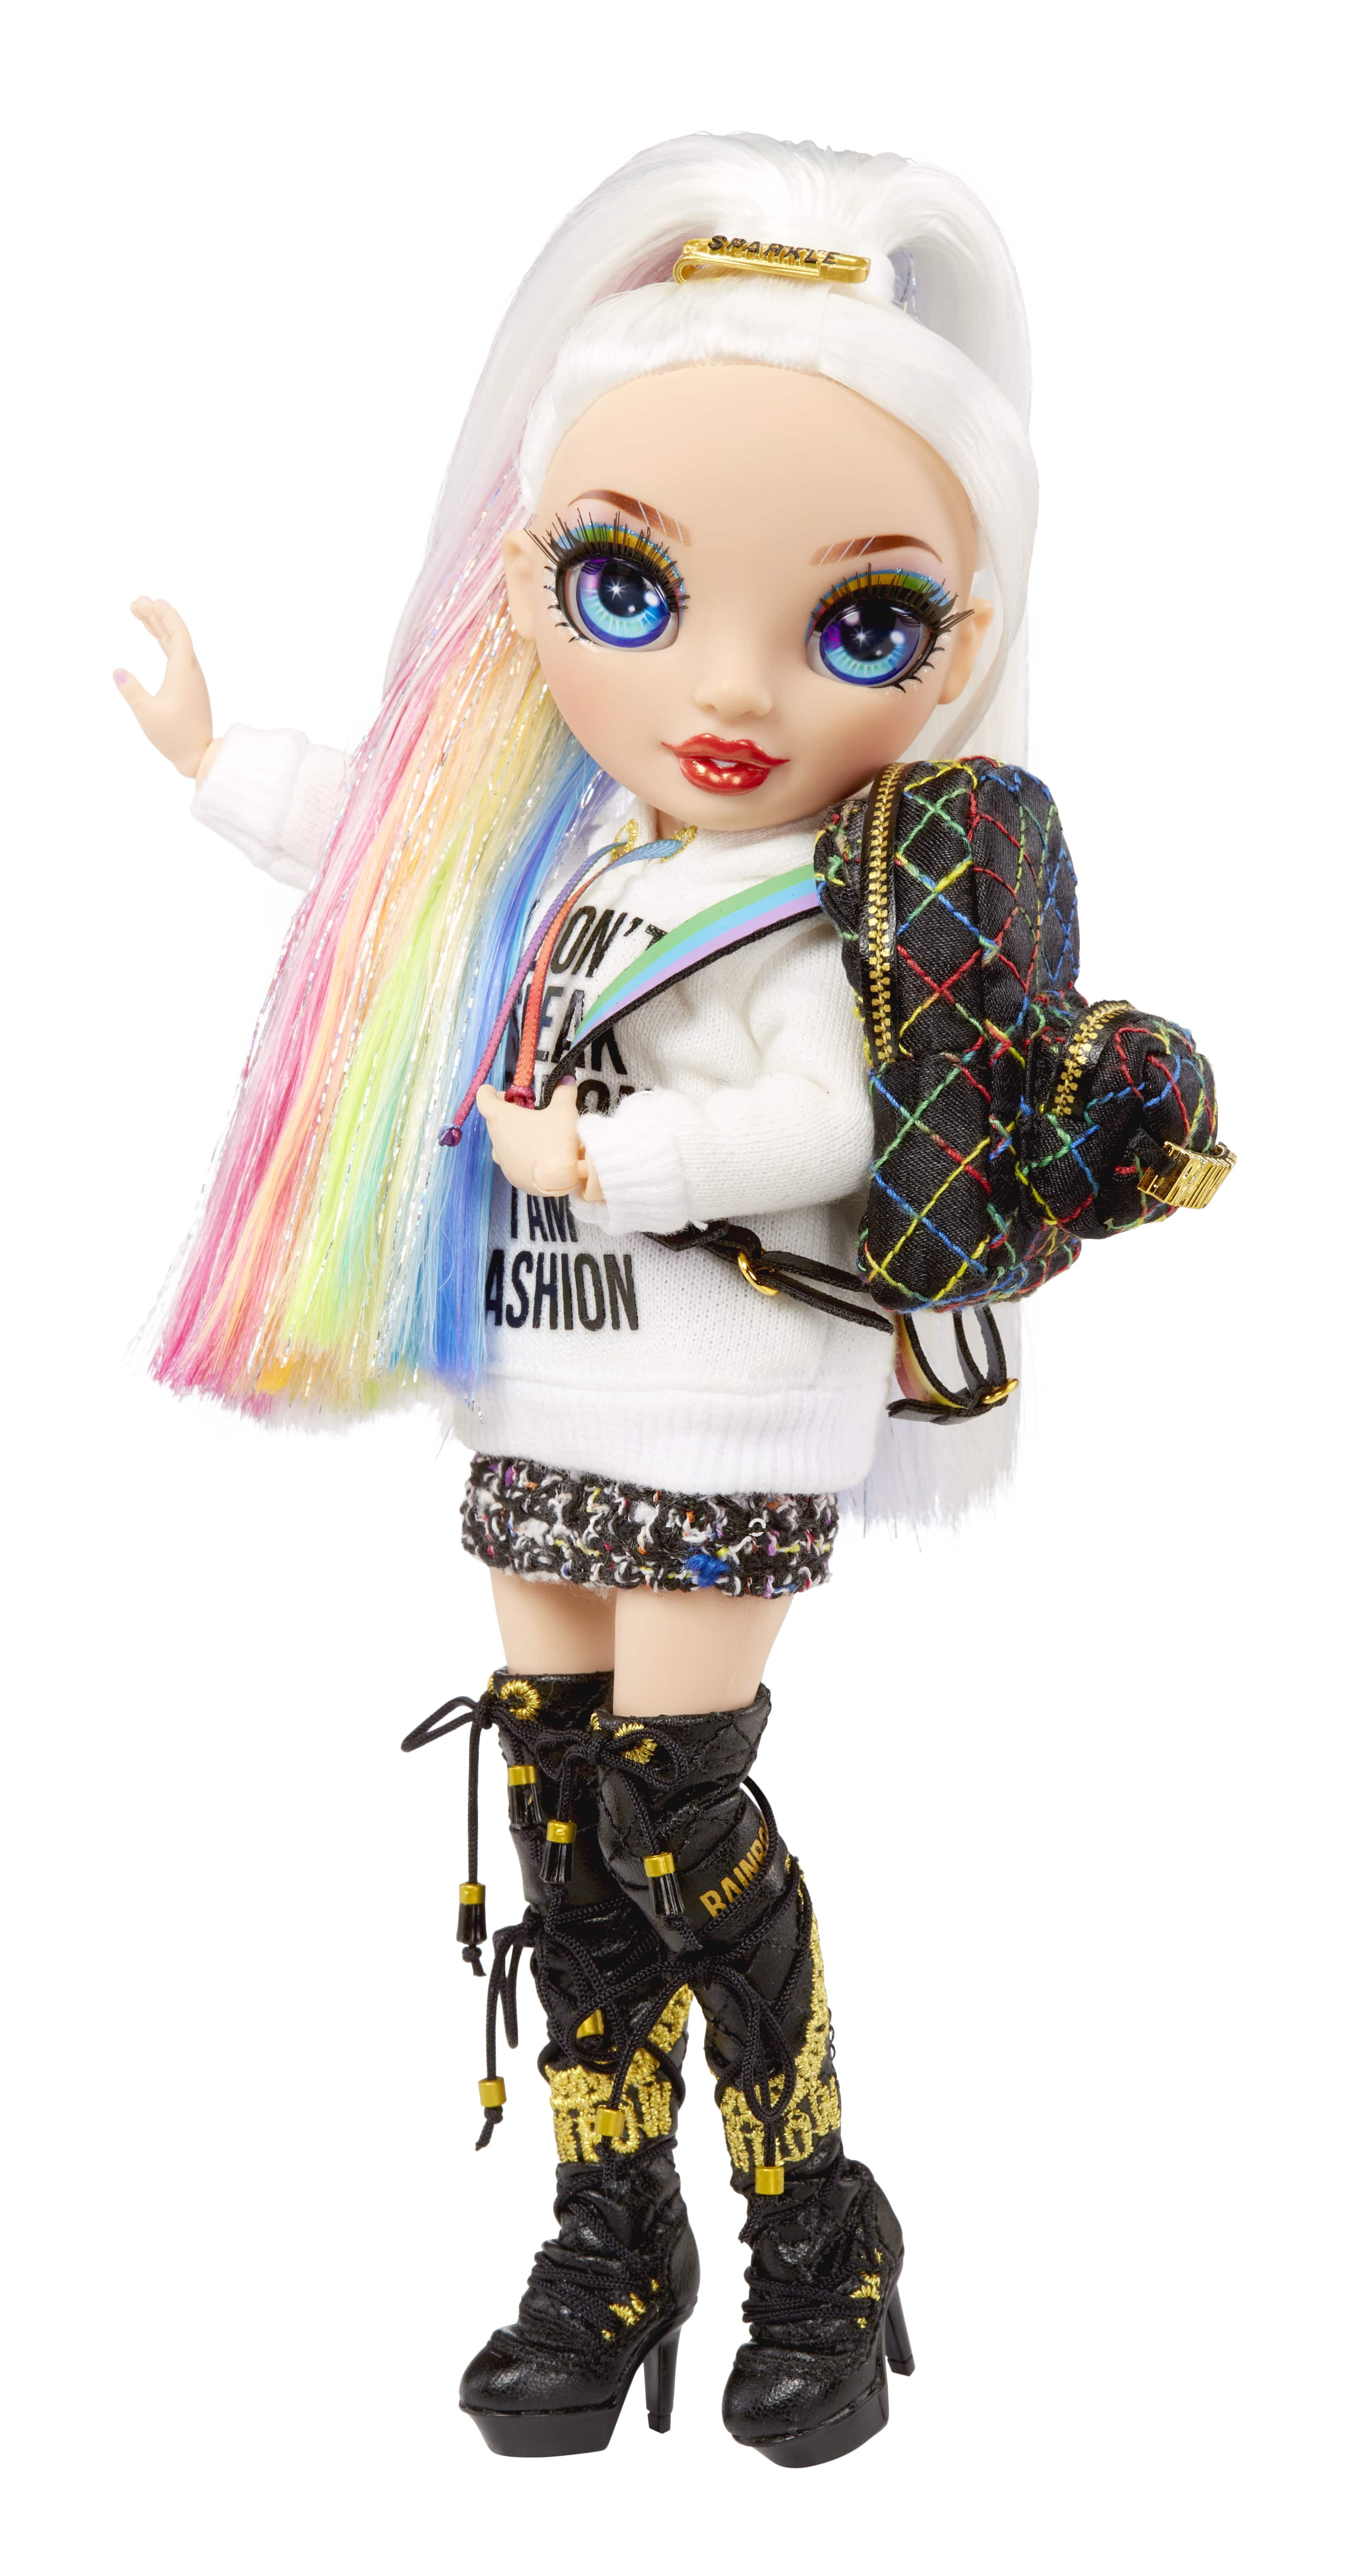 Rainbow High Jr High Amaya Raine- 9-inch RAINBOW Fashion Doll with doll accessories- open and closes backpack. Great Gift for Kids 6-12 Years Old and Collectors